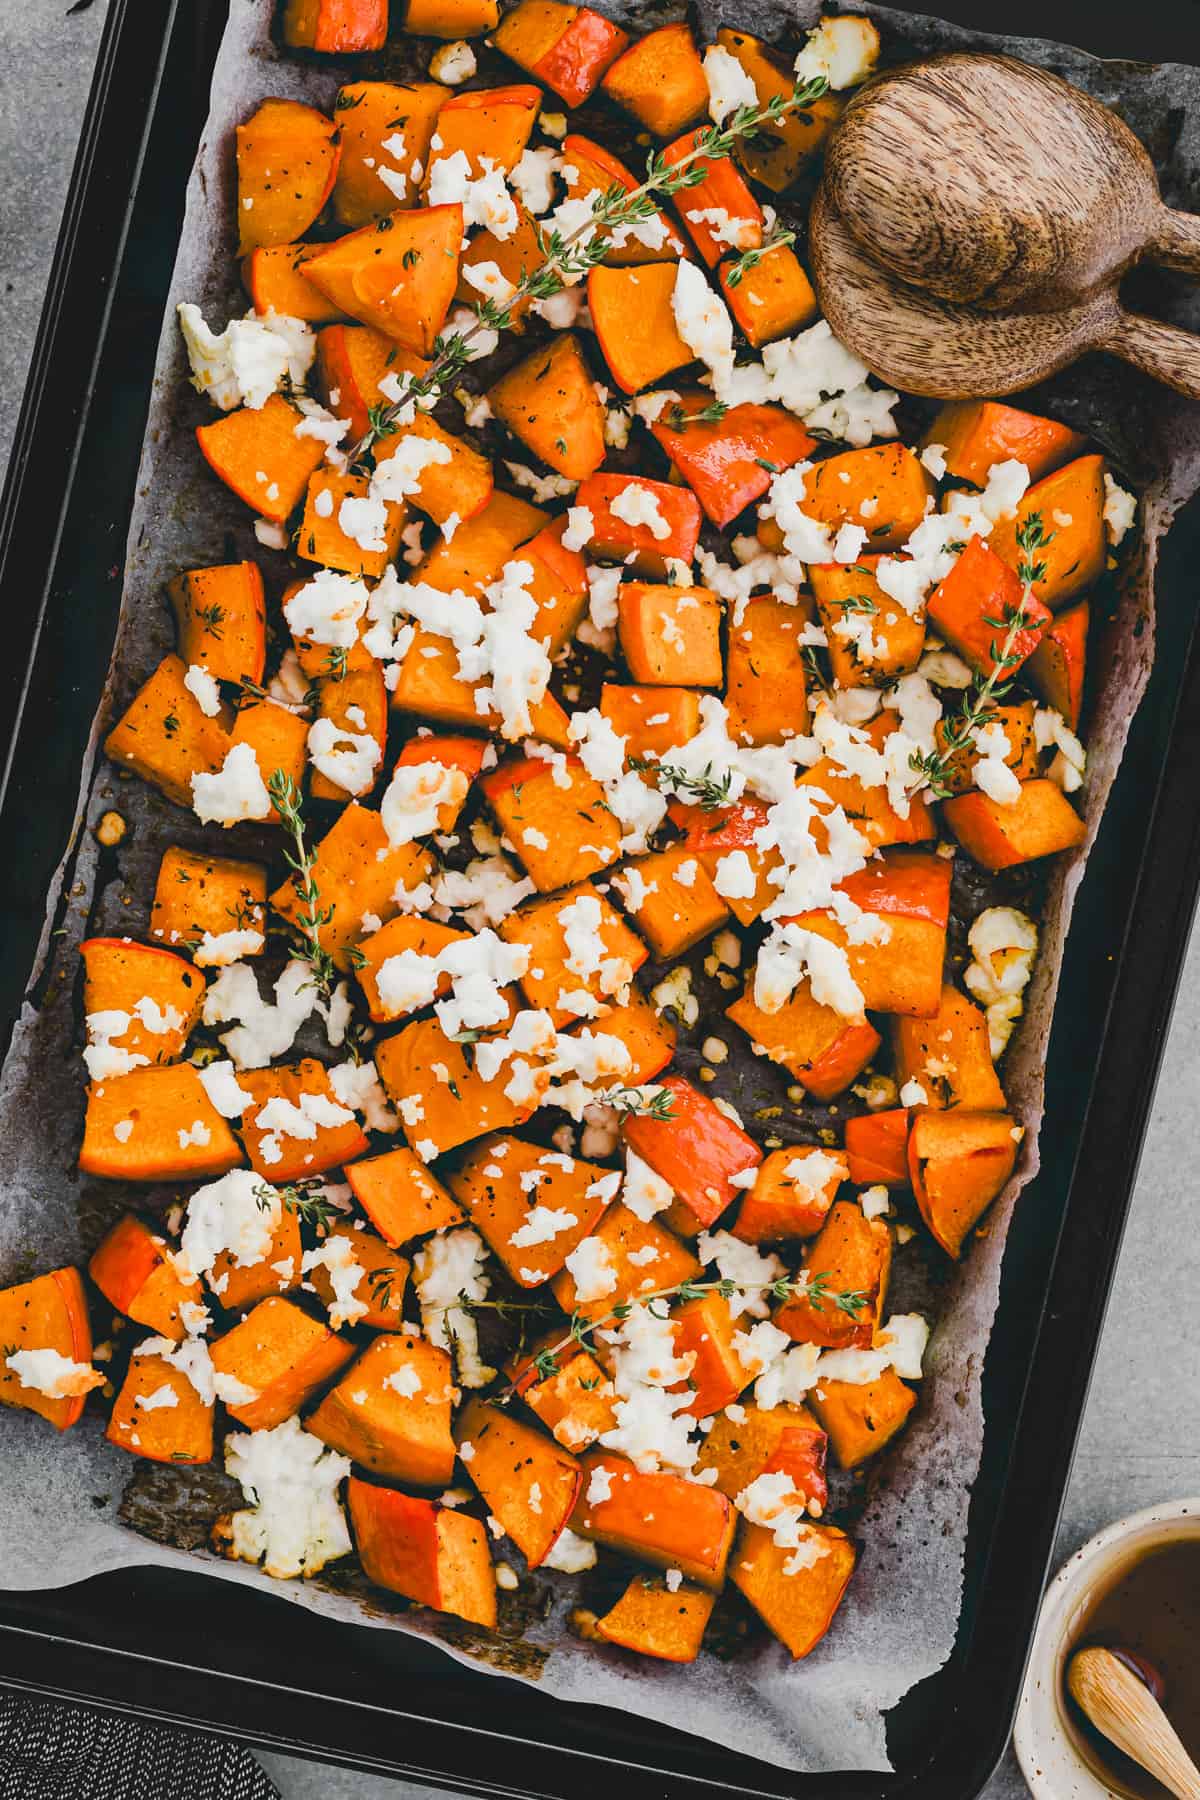 roasted butternut squash on a baking tray with melted feta cheese on top